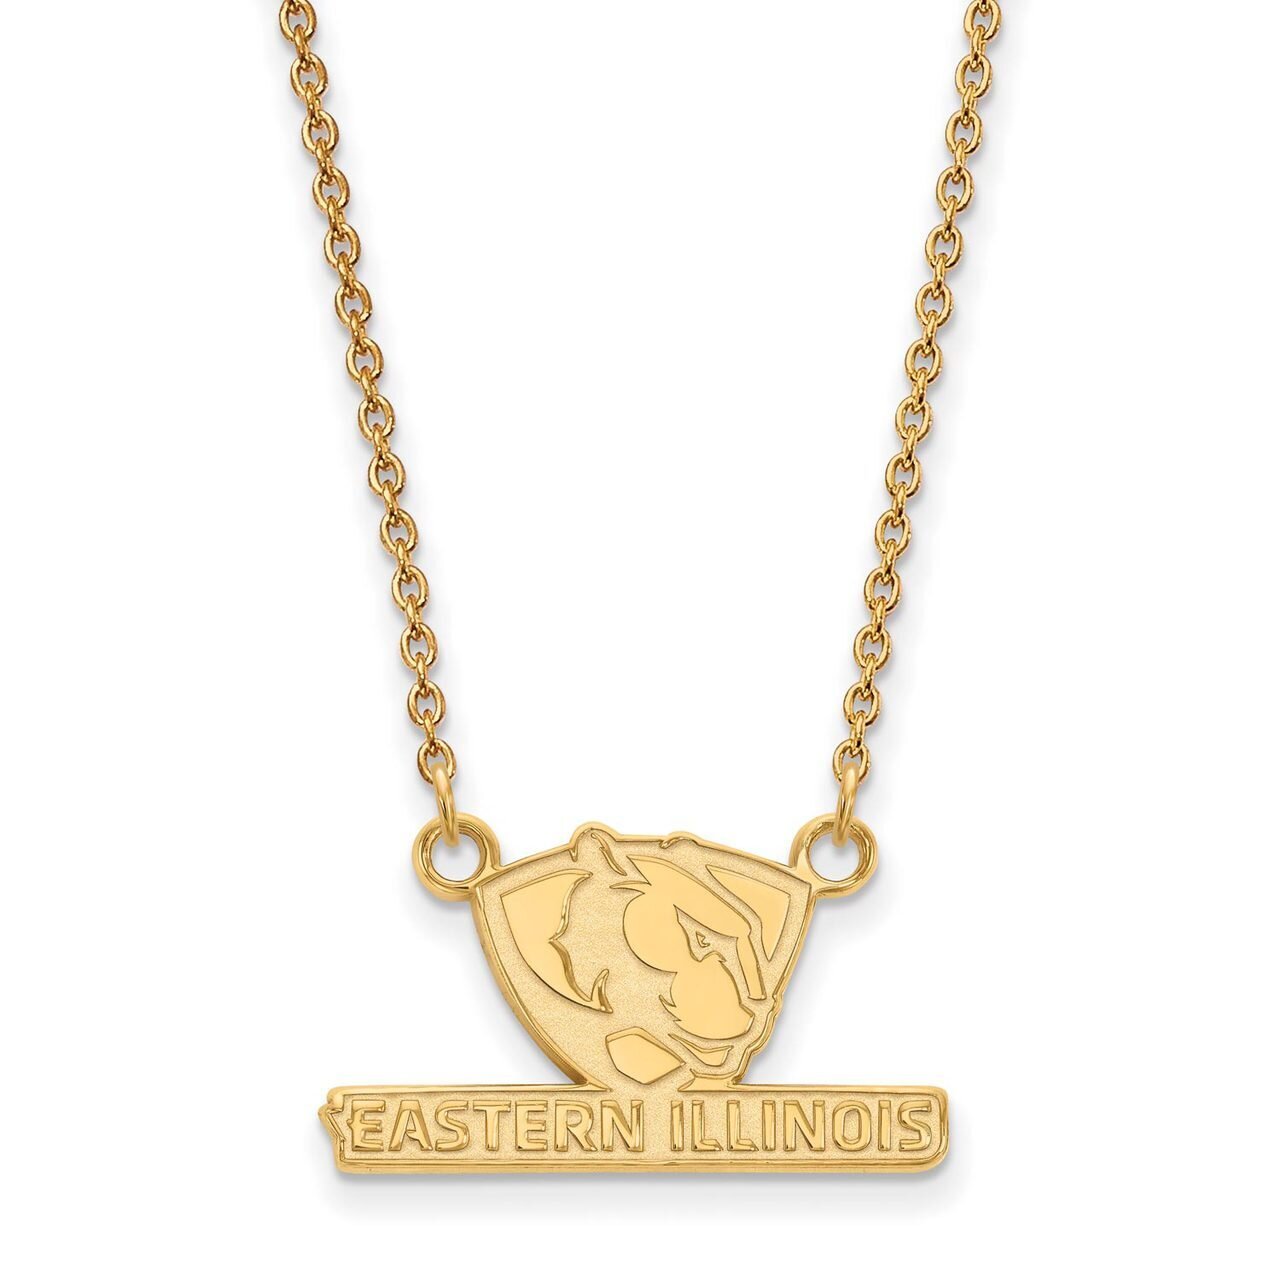 Eastern Illinois University Small Pendant with Chain Necklace Gold-plated Silver GP007EIU-18